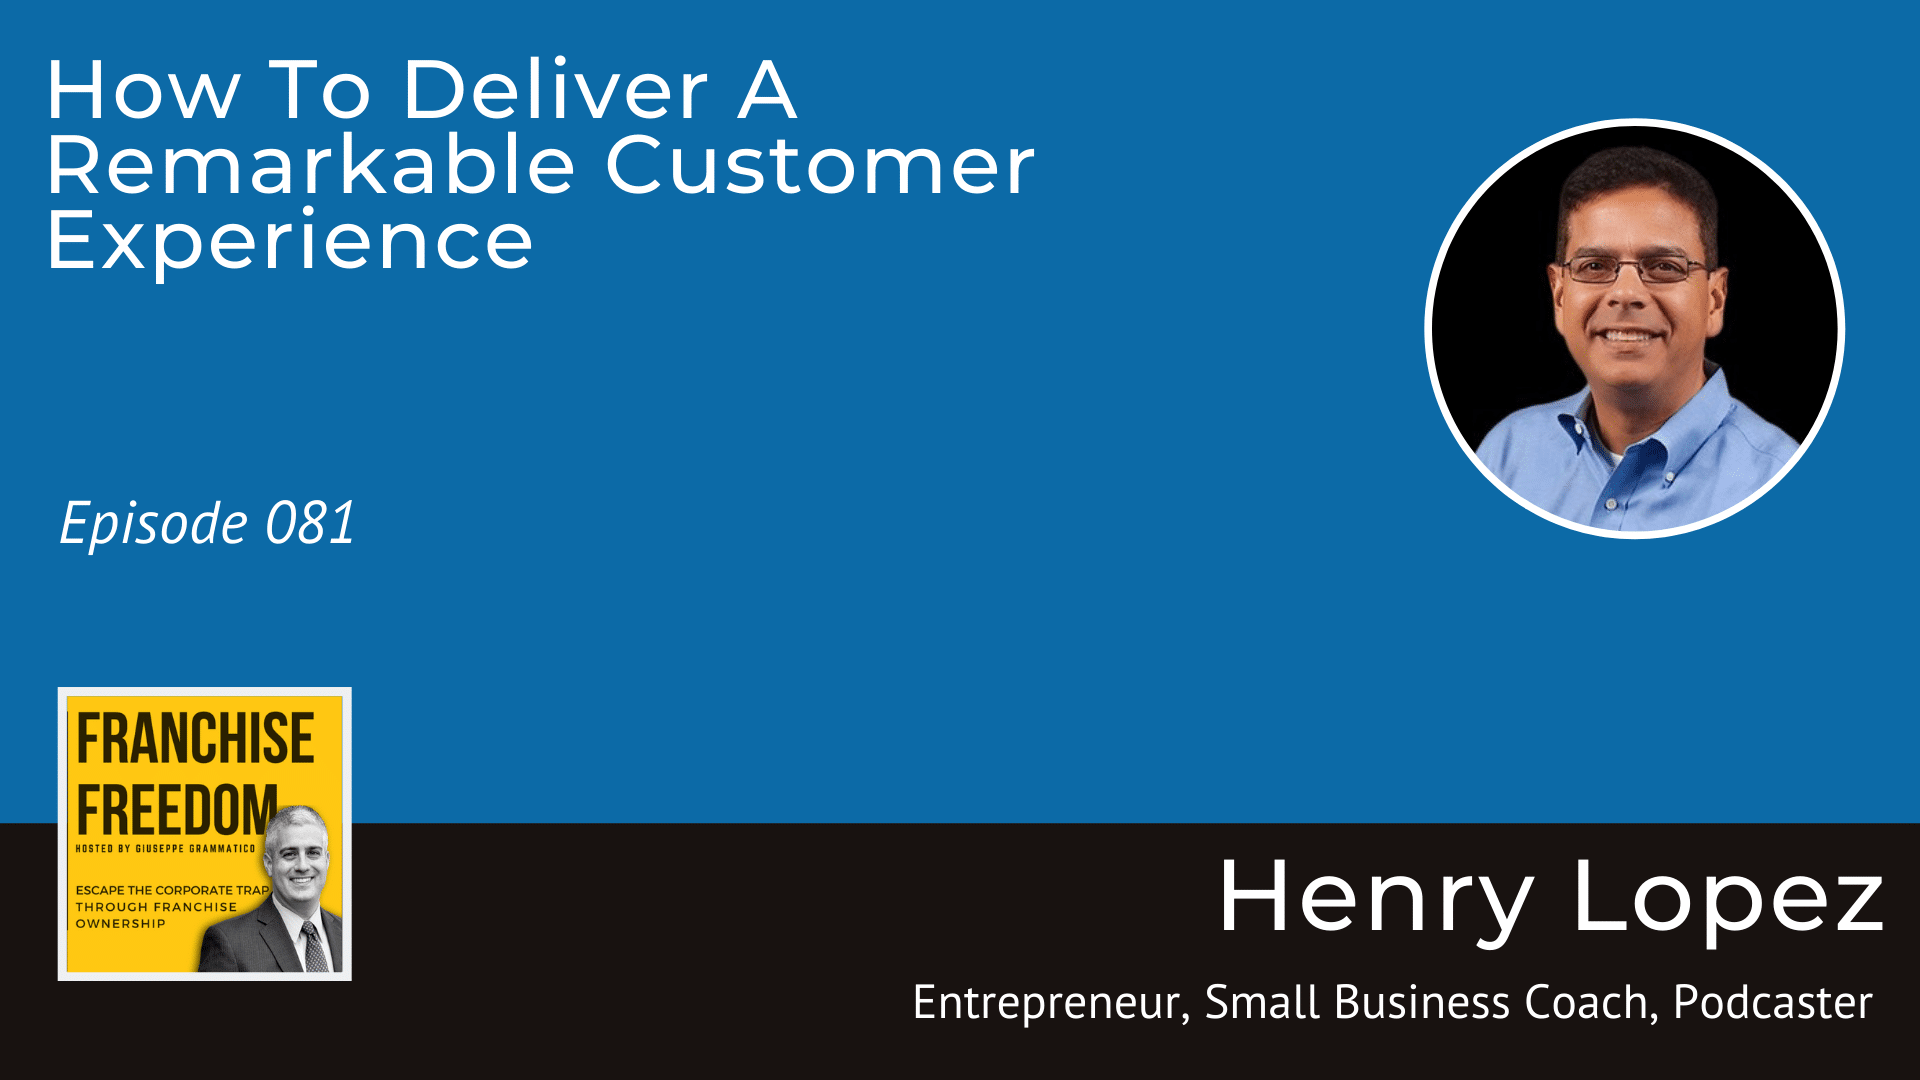 How To Deliver A Remarkable Customer Experience with Henry Lopez